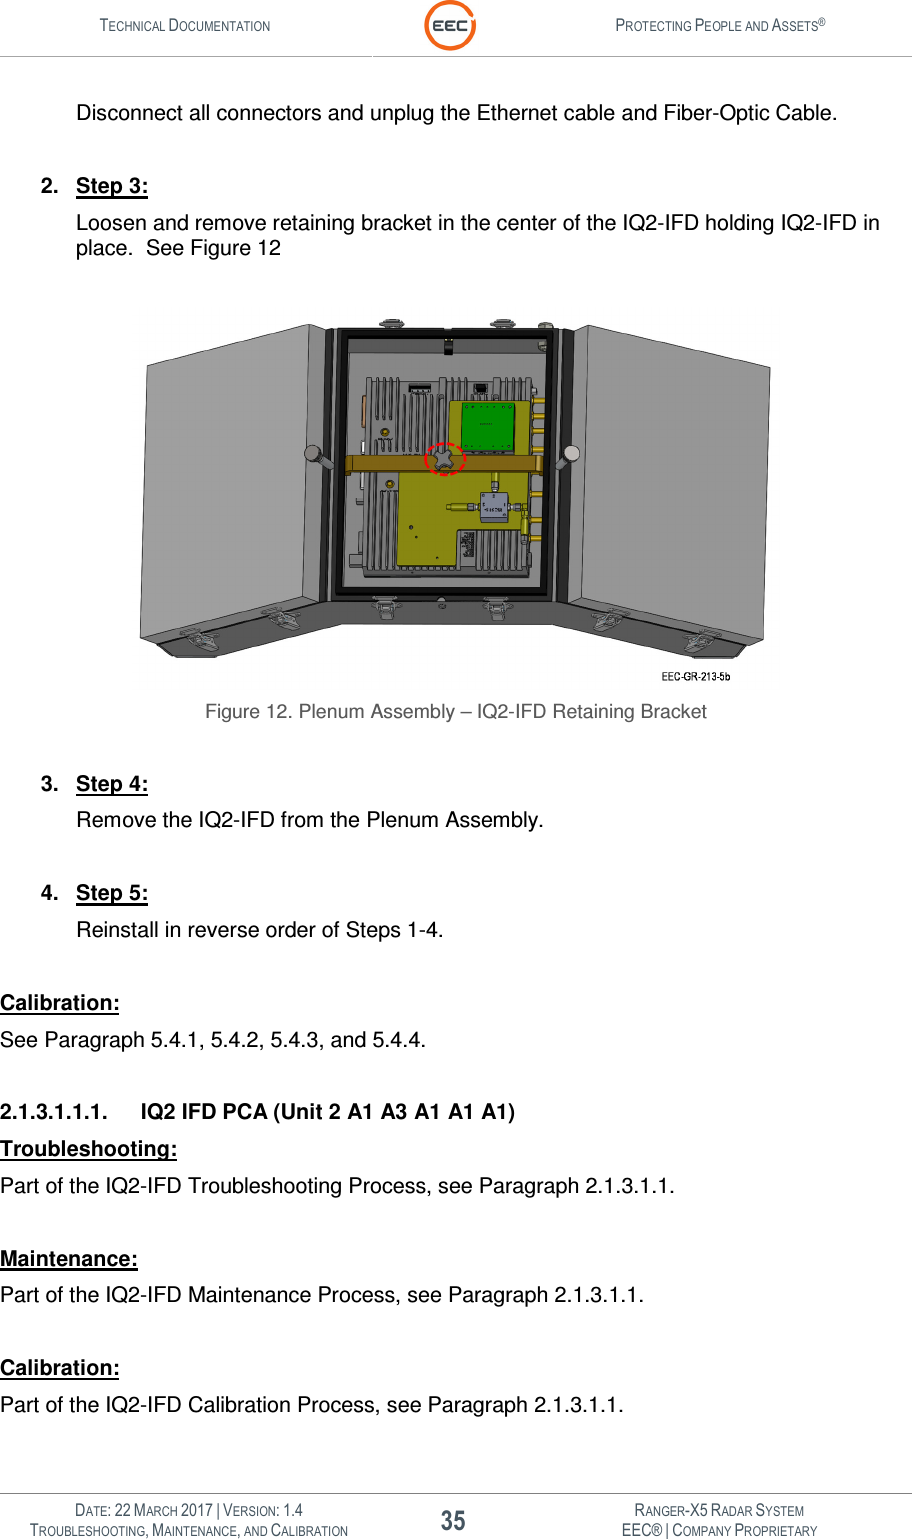 TECHNICAL DOCUMENTATION  PROTECTING PEOPLE AND ASSETS®   DATE: 22 MARCH 2017 | VERSION: 1.4 35 RANGER-X5 RADAR SYSTEM TROUBLESHOOTING, MAINTENANCE, AND CALIBRATION EEC® | COMPANY PROPRIETARY  Disconnect all connectors and unplug the Ethernet cable and Fiber-Optic Cable.  2.  Step 3: Loosen and remove retaining bracket in the center of the IQ2-IFD holding IQ2-IFD in place.  See Figure 12   Figure 12. Plenum Assembly – IQ2-IFD Retaining Bracket  3.  Step 4: Remove the IQ2-IFD from the Plenum Assembly.  4.  Step 5: Reinstall in reverse order of Steps 1-4.  Calibration: See Paragraph 5.4.1, 5.4.2, 5.4.3, and 5.4.4.  2.1.3.1.1.1.  IQ2 IFD PCA (Unit 2 A1 A3 A1 A1 A1) Troubleshooting: Part of the IQ2-IFD Troubleshooting Process, see Paragraph 2.1.3.1.1.  Maintenance: Part of the IQ2-IFD Maintenance Process, see Paragraph 2.1.3.1.1.  Calibration: Part of the IQ2-IFD Calibration Process, see Paragraph 2.1.3.1.1.  